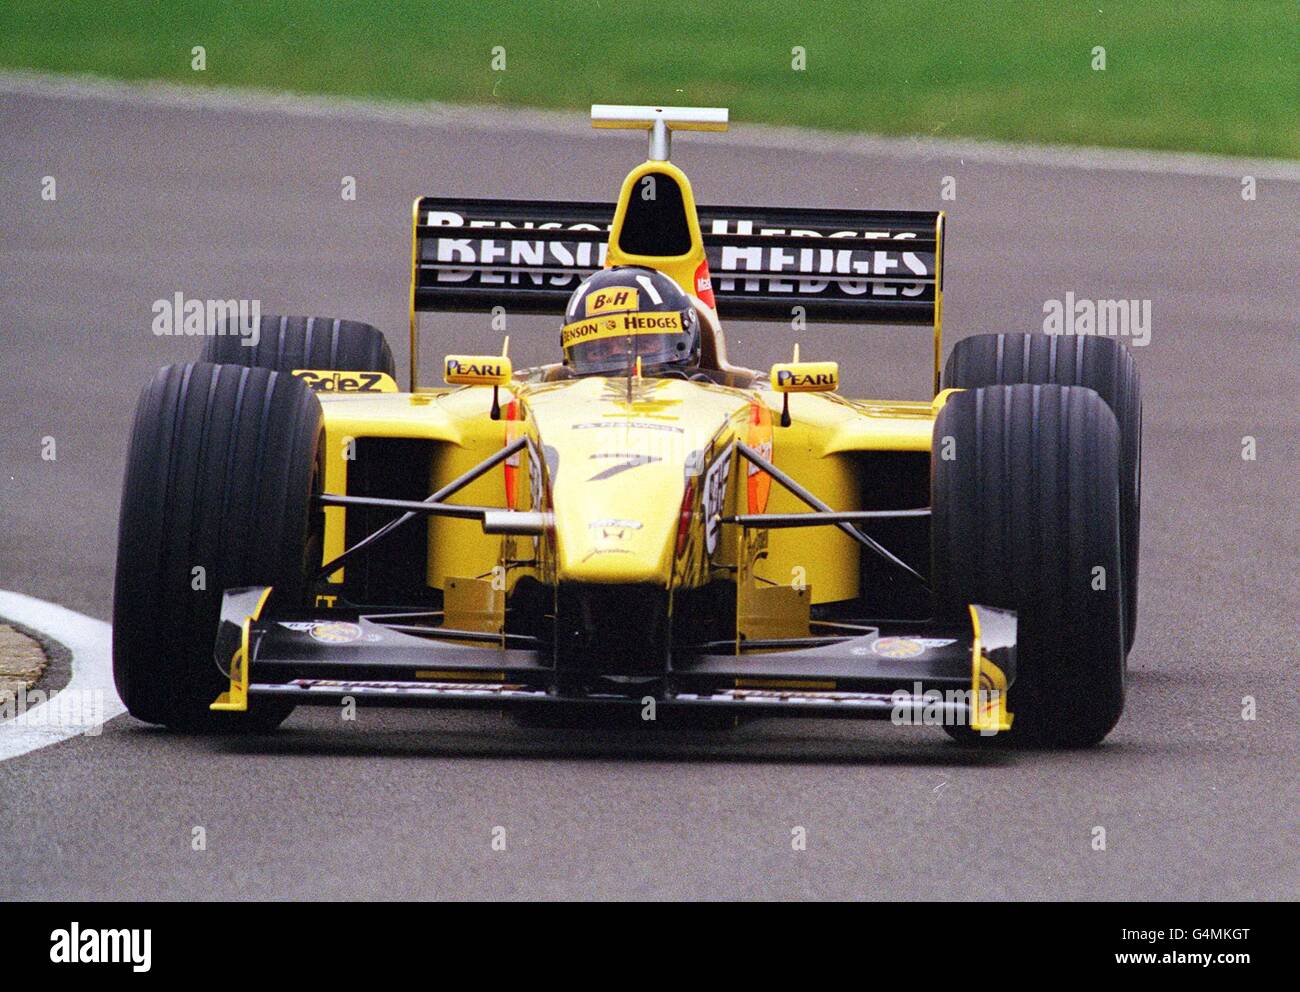 Library file picture dated 3/2/99 of British Formula One driver Damon Hill testing his Mugen-Honda powered Jordan Formula One car at Silverstone. Hill today, Wednesday 16th 1999 announced his retirement from